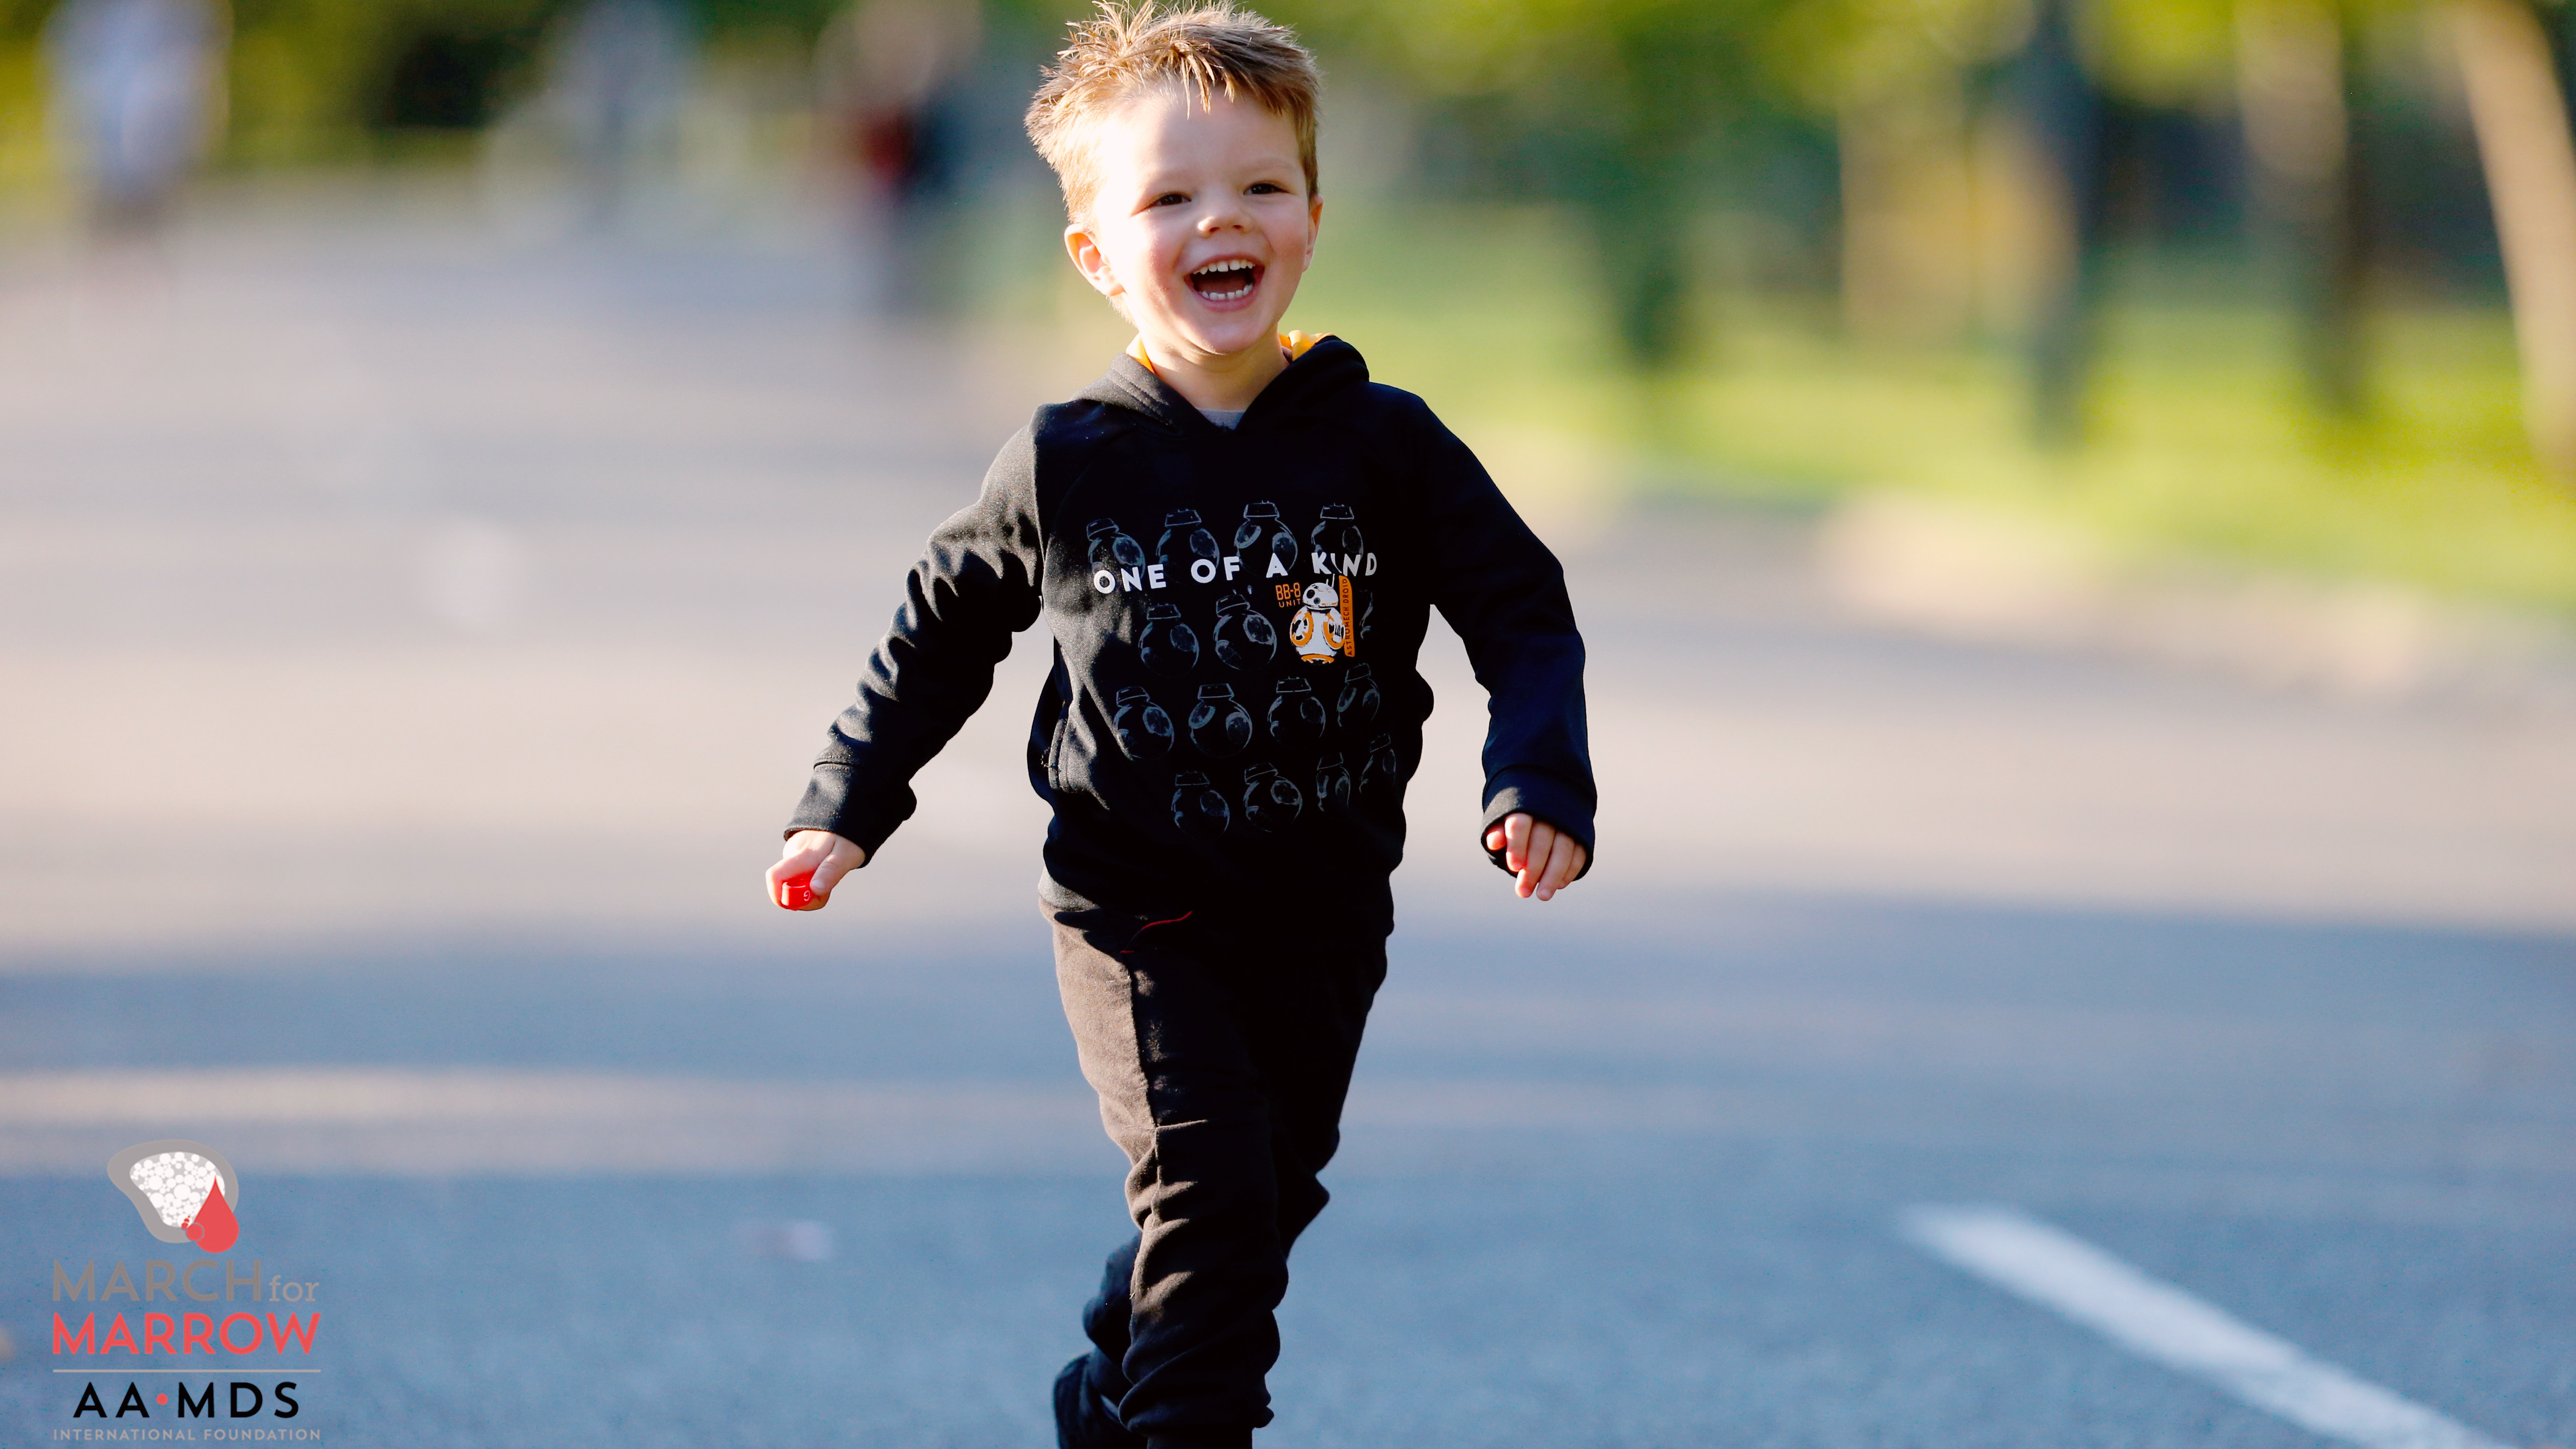 Introductory image: Child at March for Marrow walk